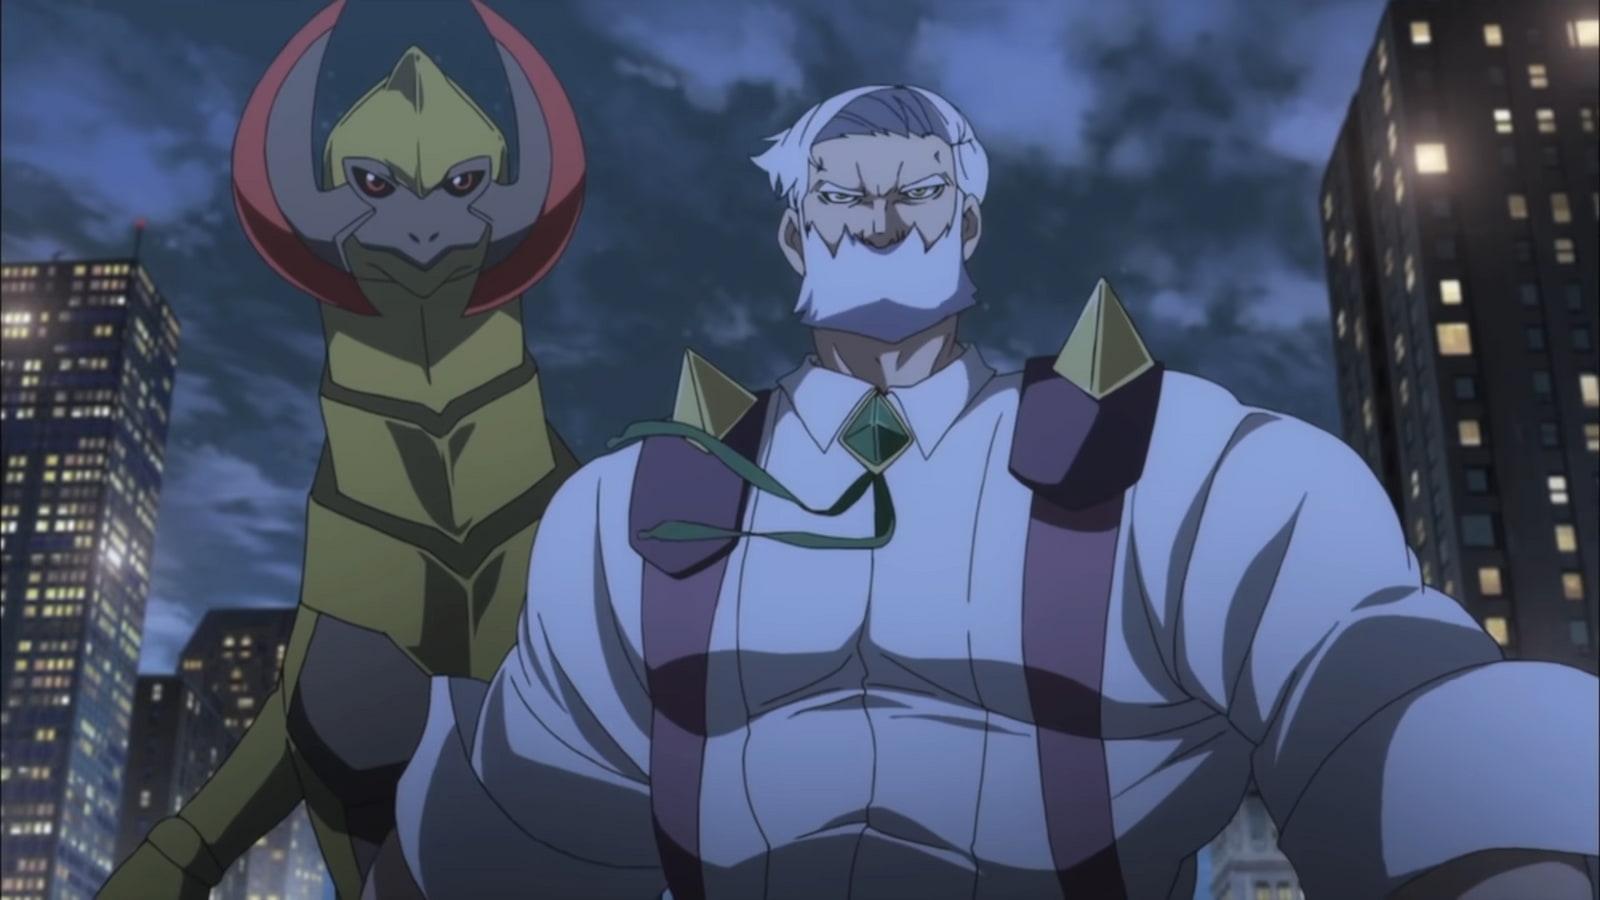 Pokemon Black & White anime turned a surprising Gym Leader into a "hunk"